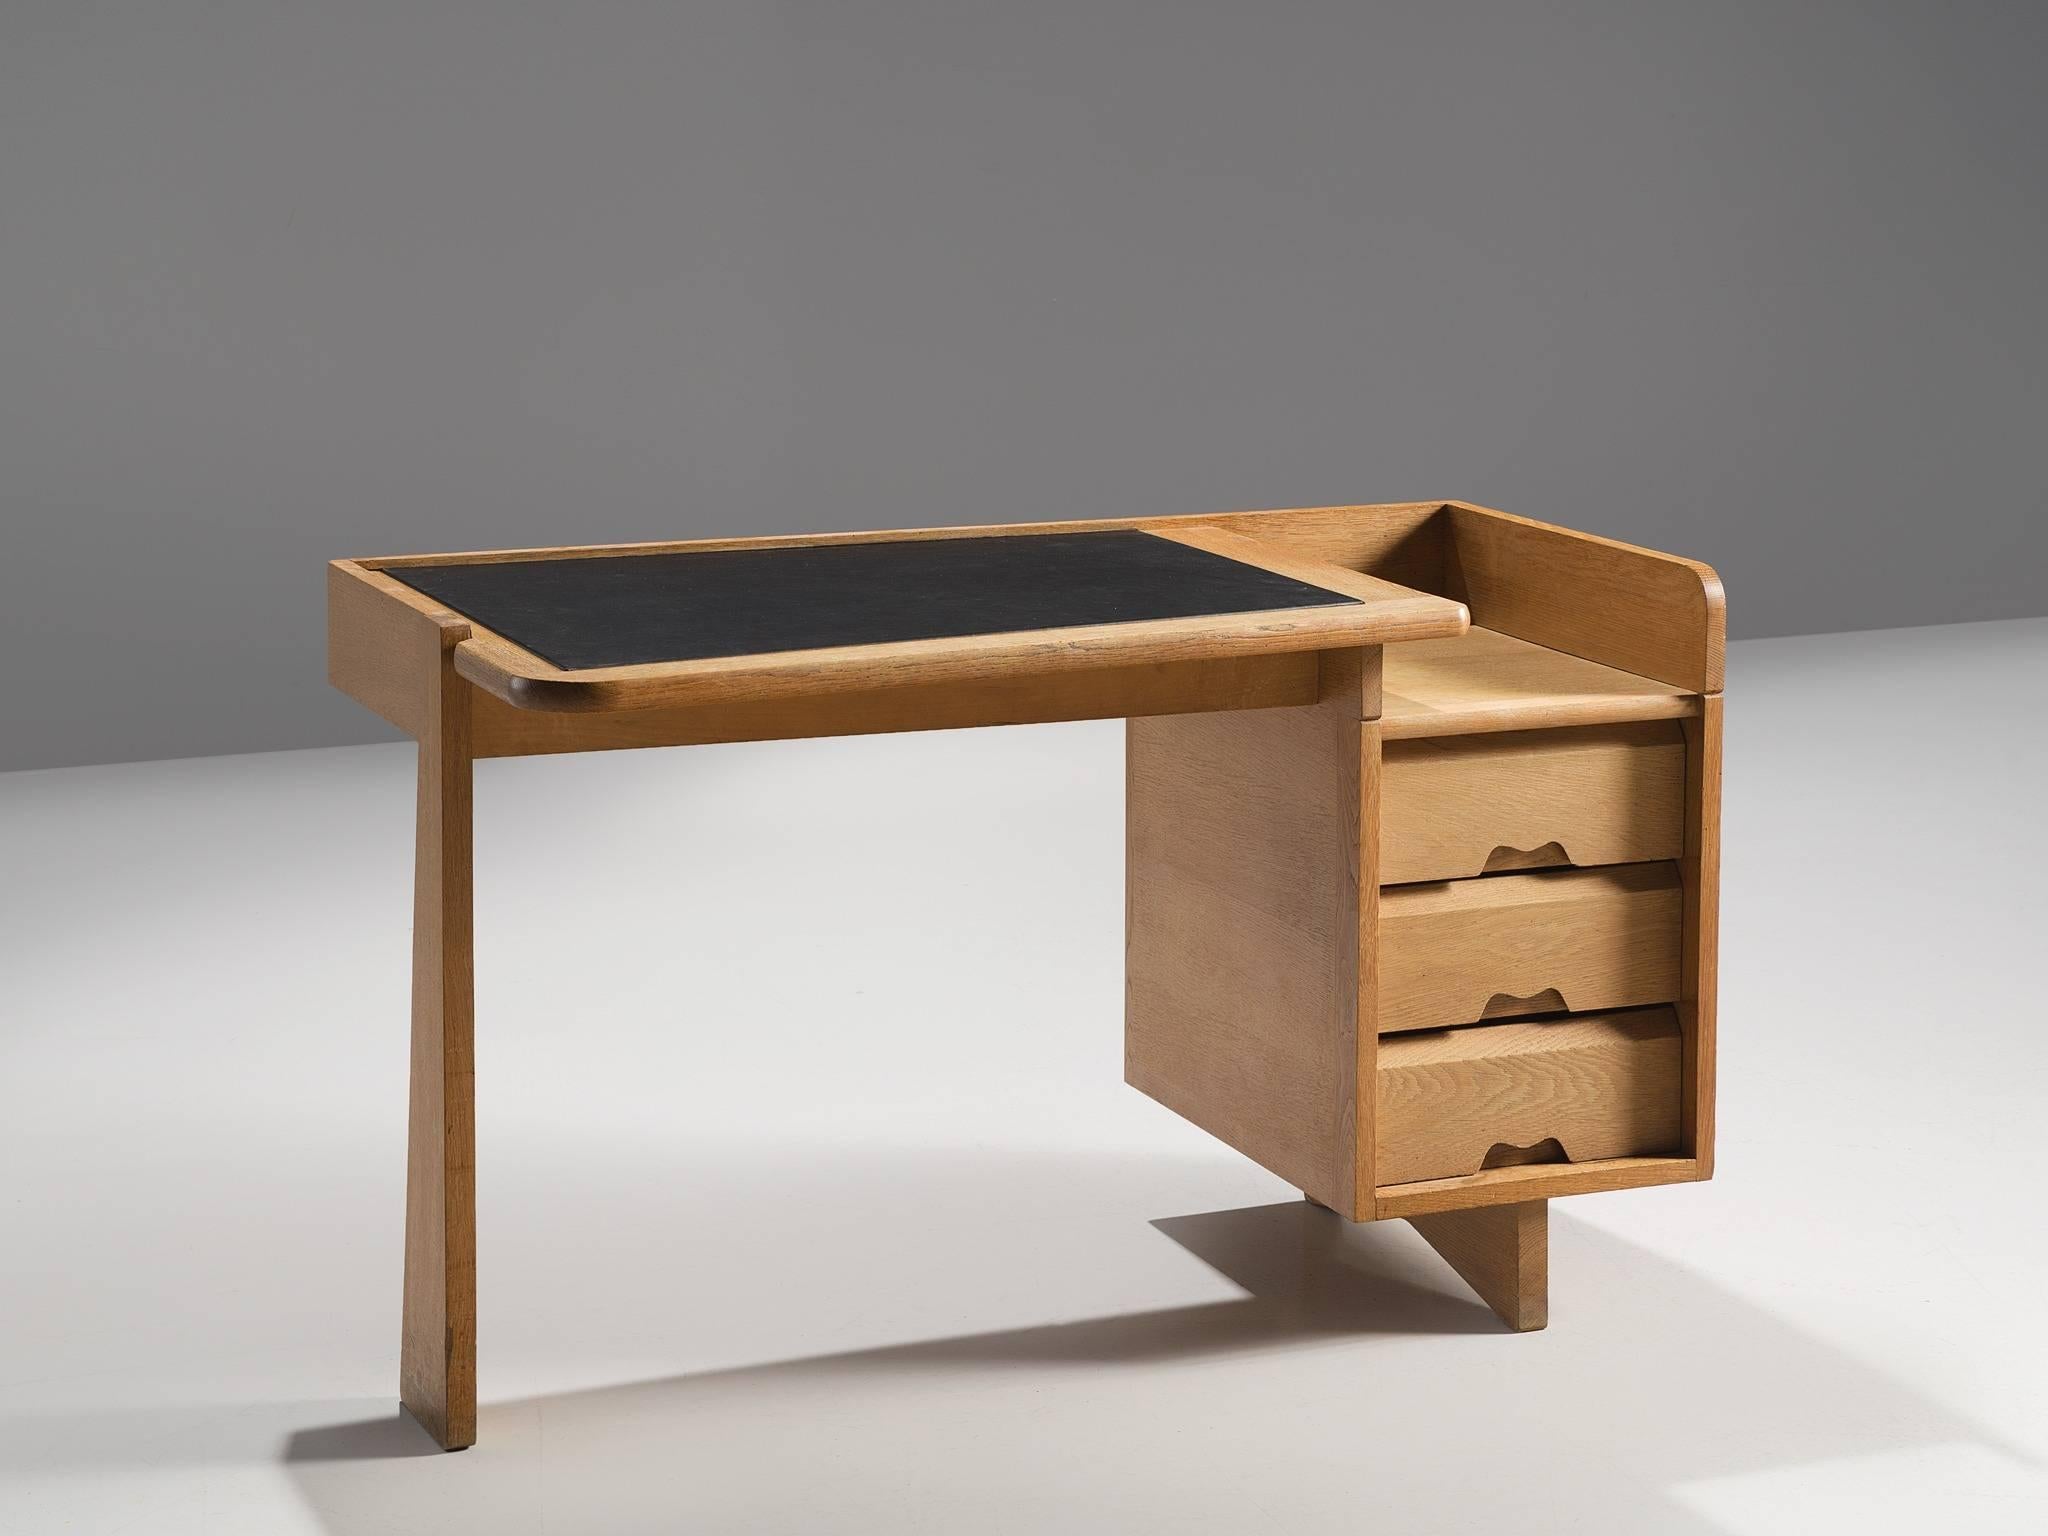 Guillerme et Chambron, desk, oak and leather, France, 1960s. 

This small desk is designed by the French designer duo Guillerme and Chambron. This writing desk holds the characteristic decorations and lines of this duo such as the decorative handles